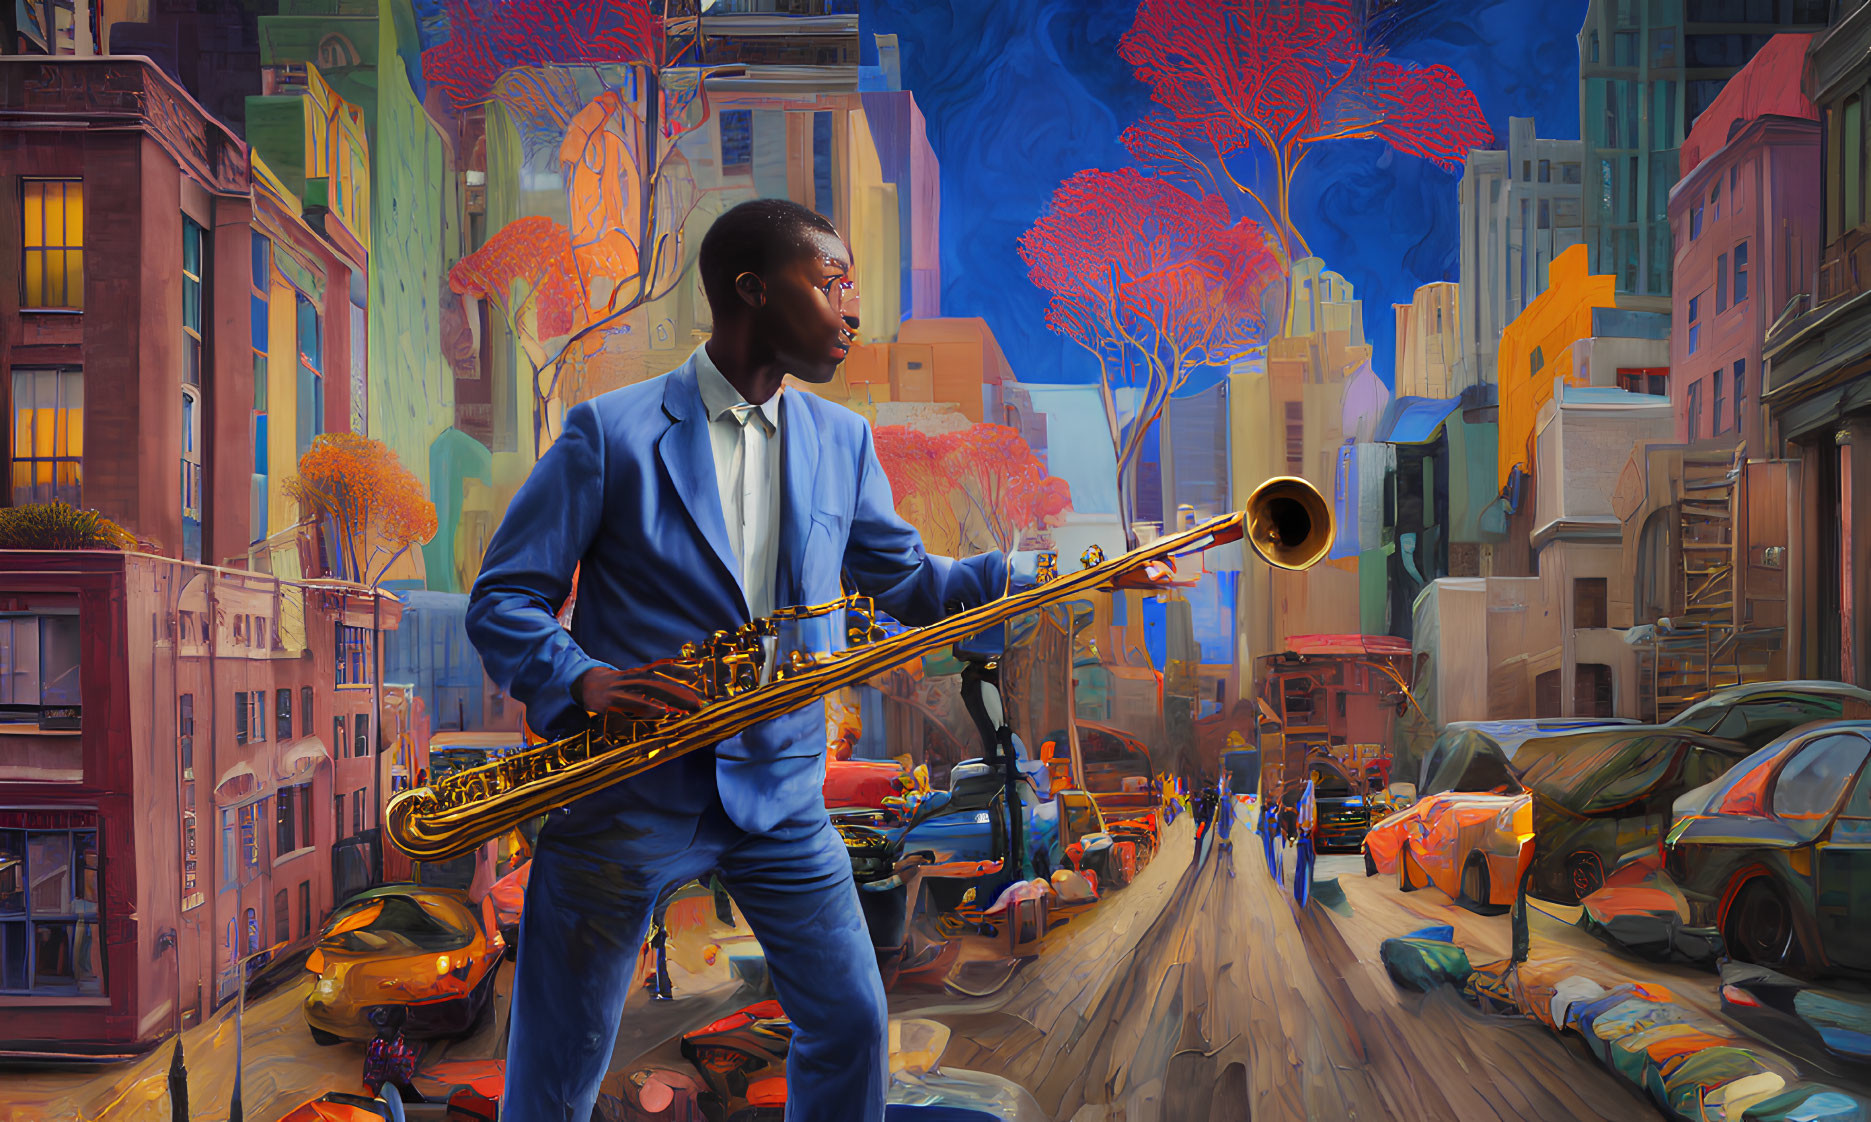 Man in Blue Suit Playing Saxophone on Vibrant City Street